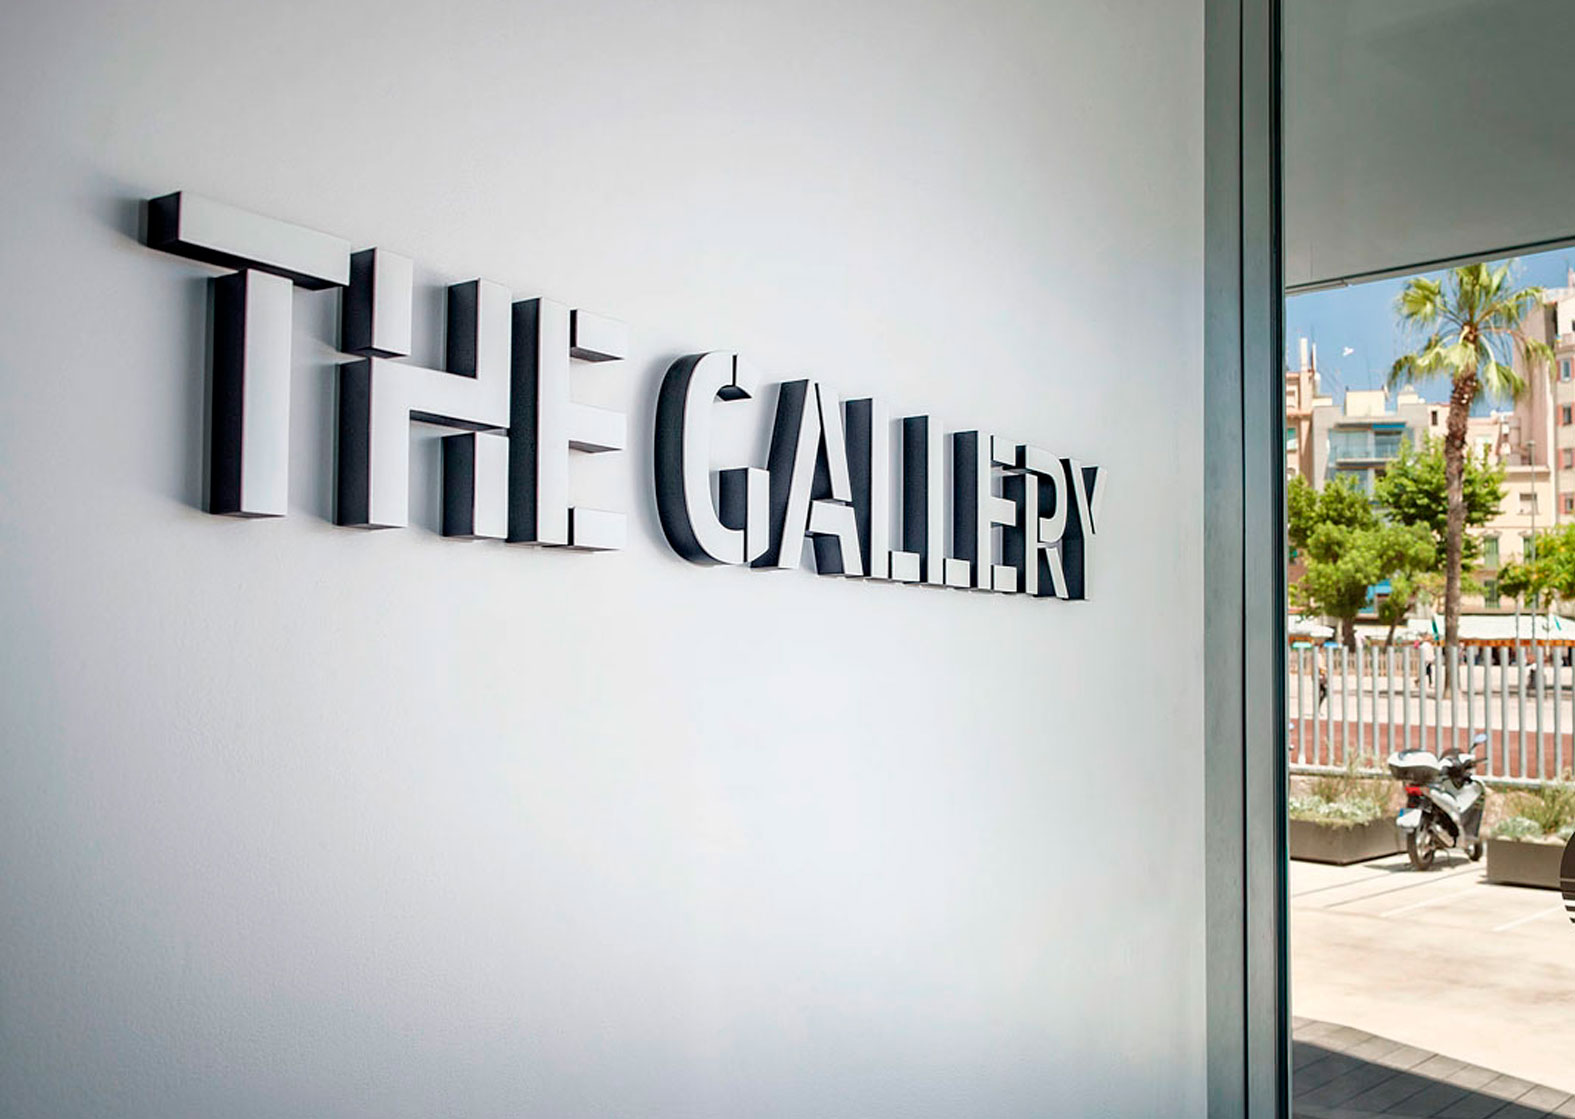 thegallery